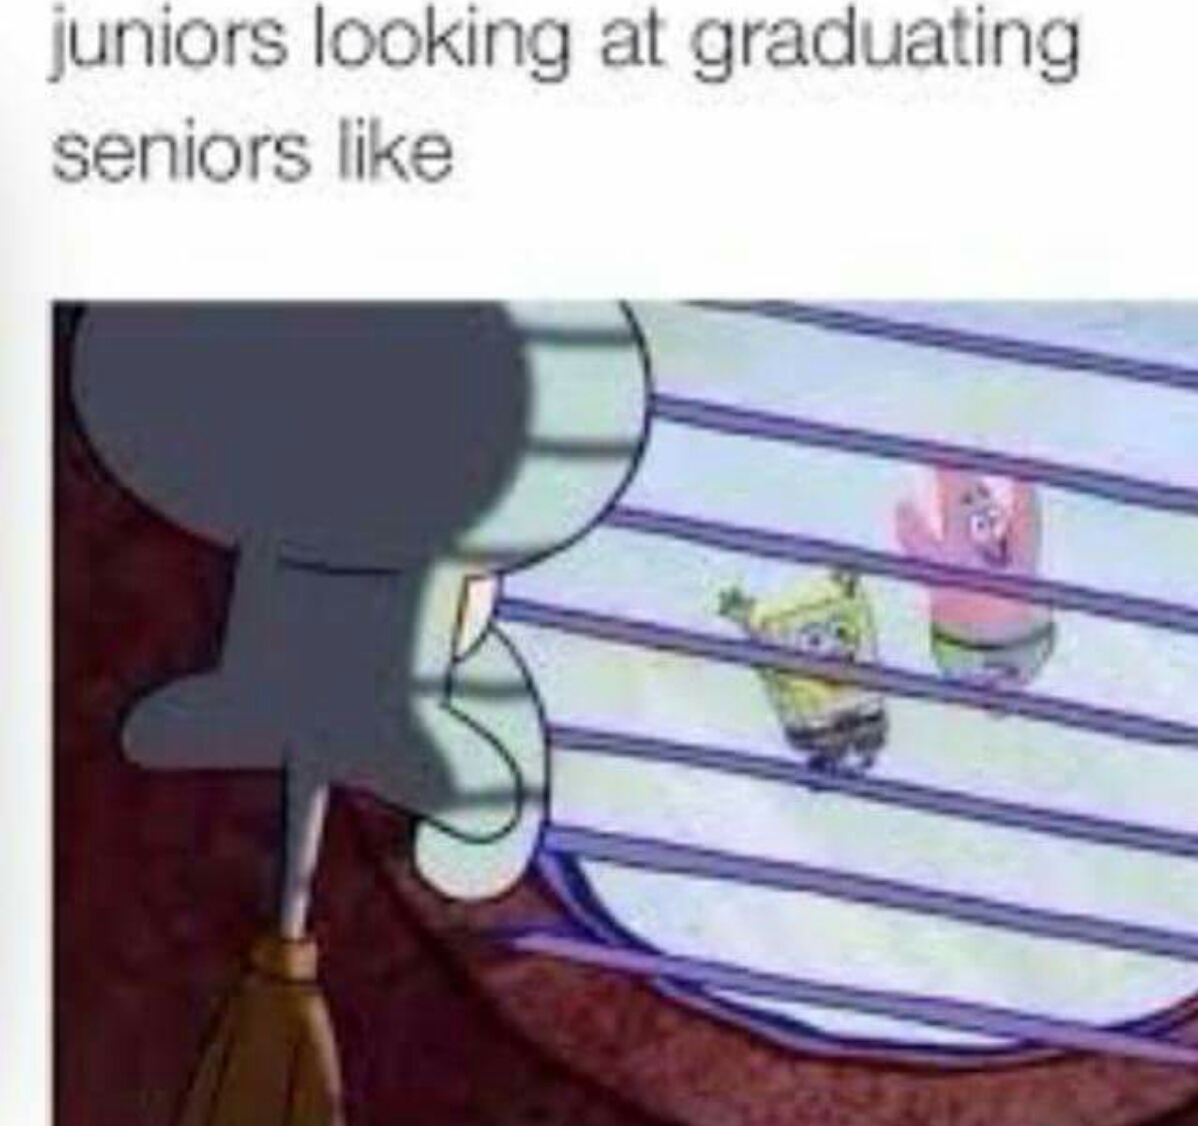 Just one more year